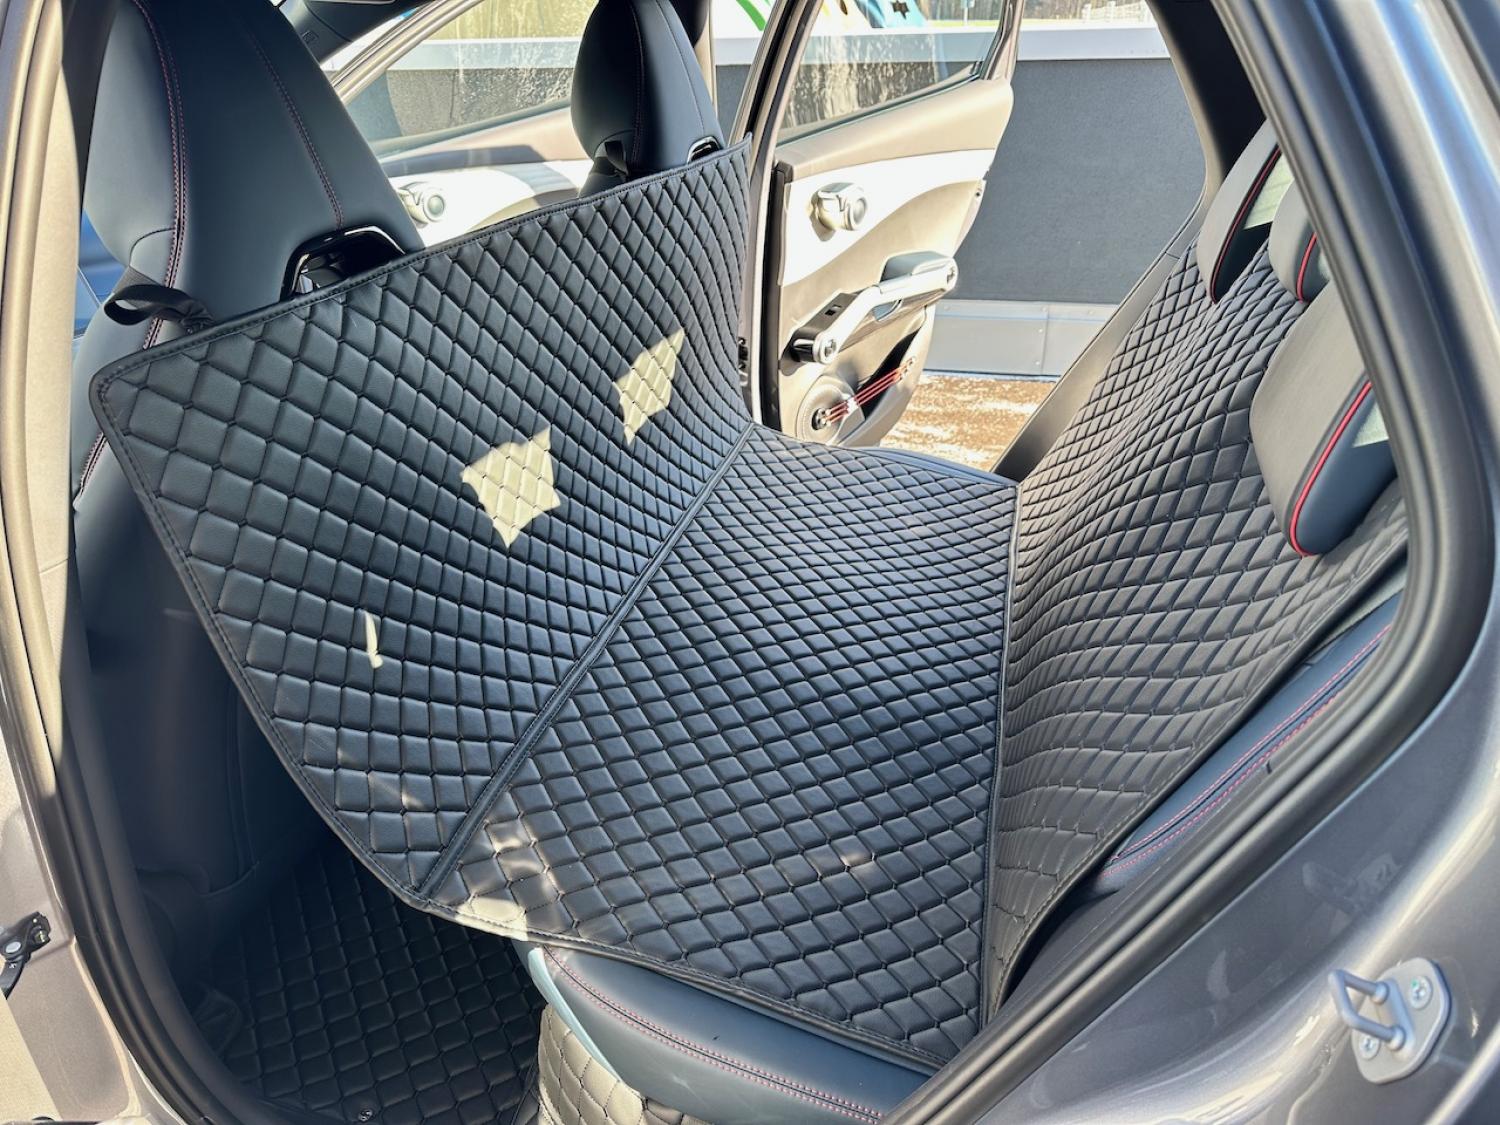 CARSTYLER® Back Seat Cover Geeignet Für Land Rover Range Rover LG/L405, 2012-2021